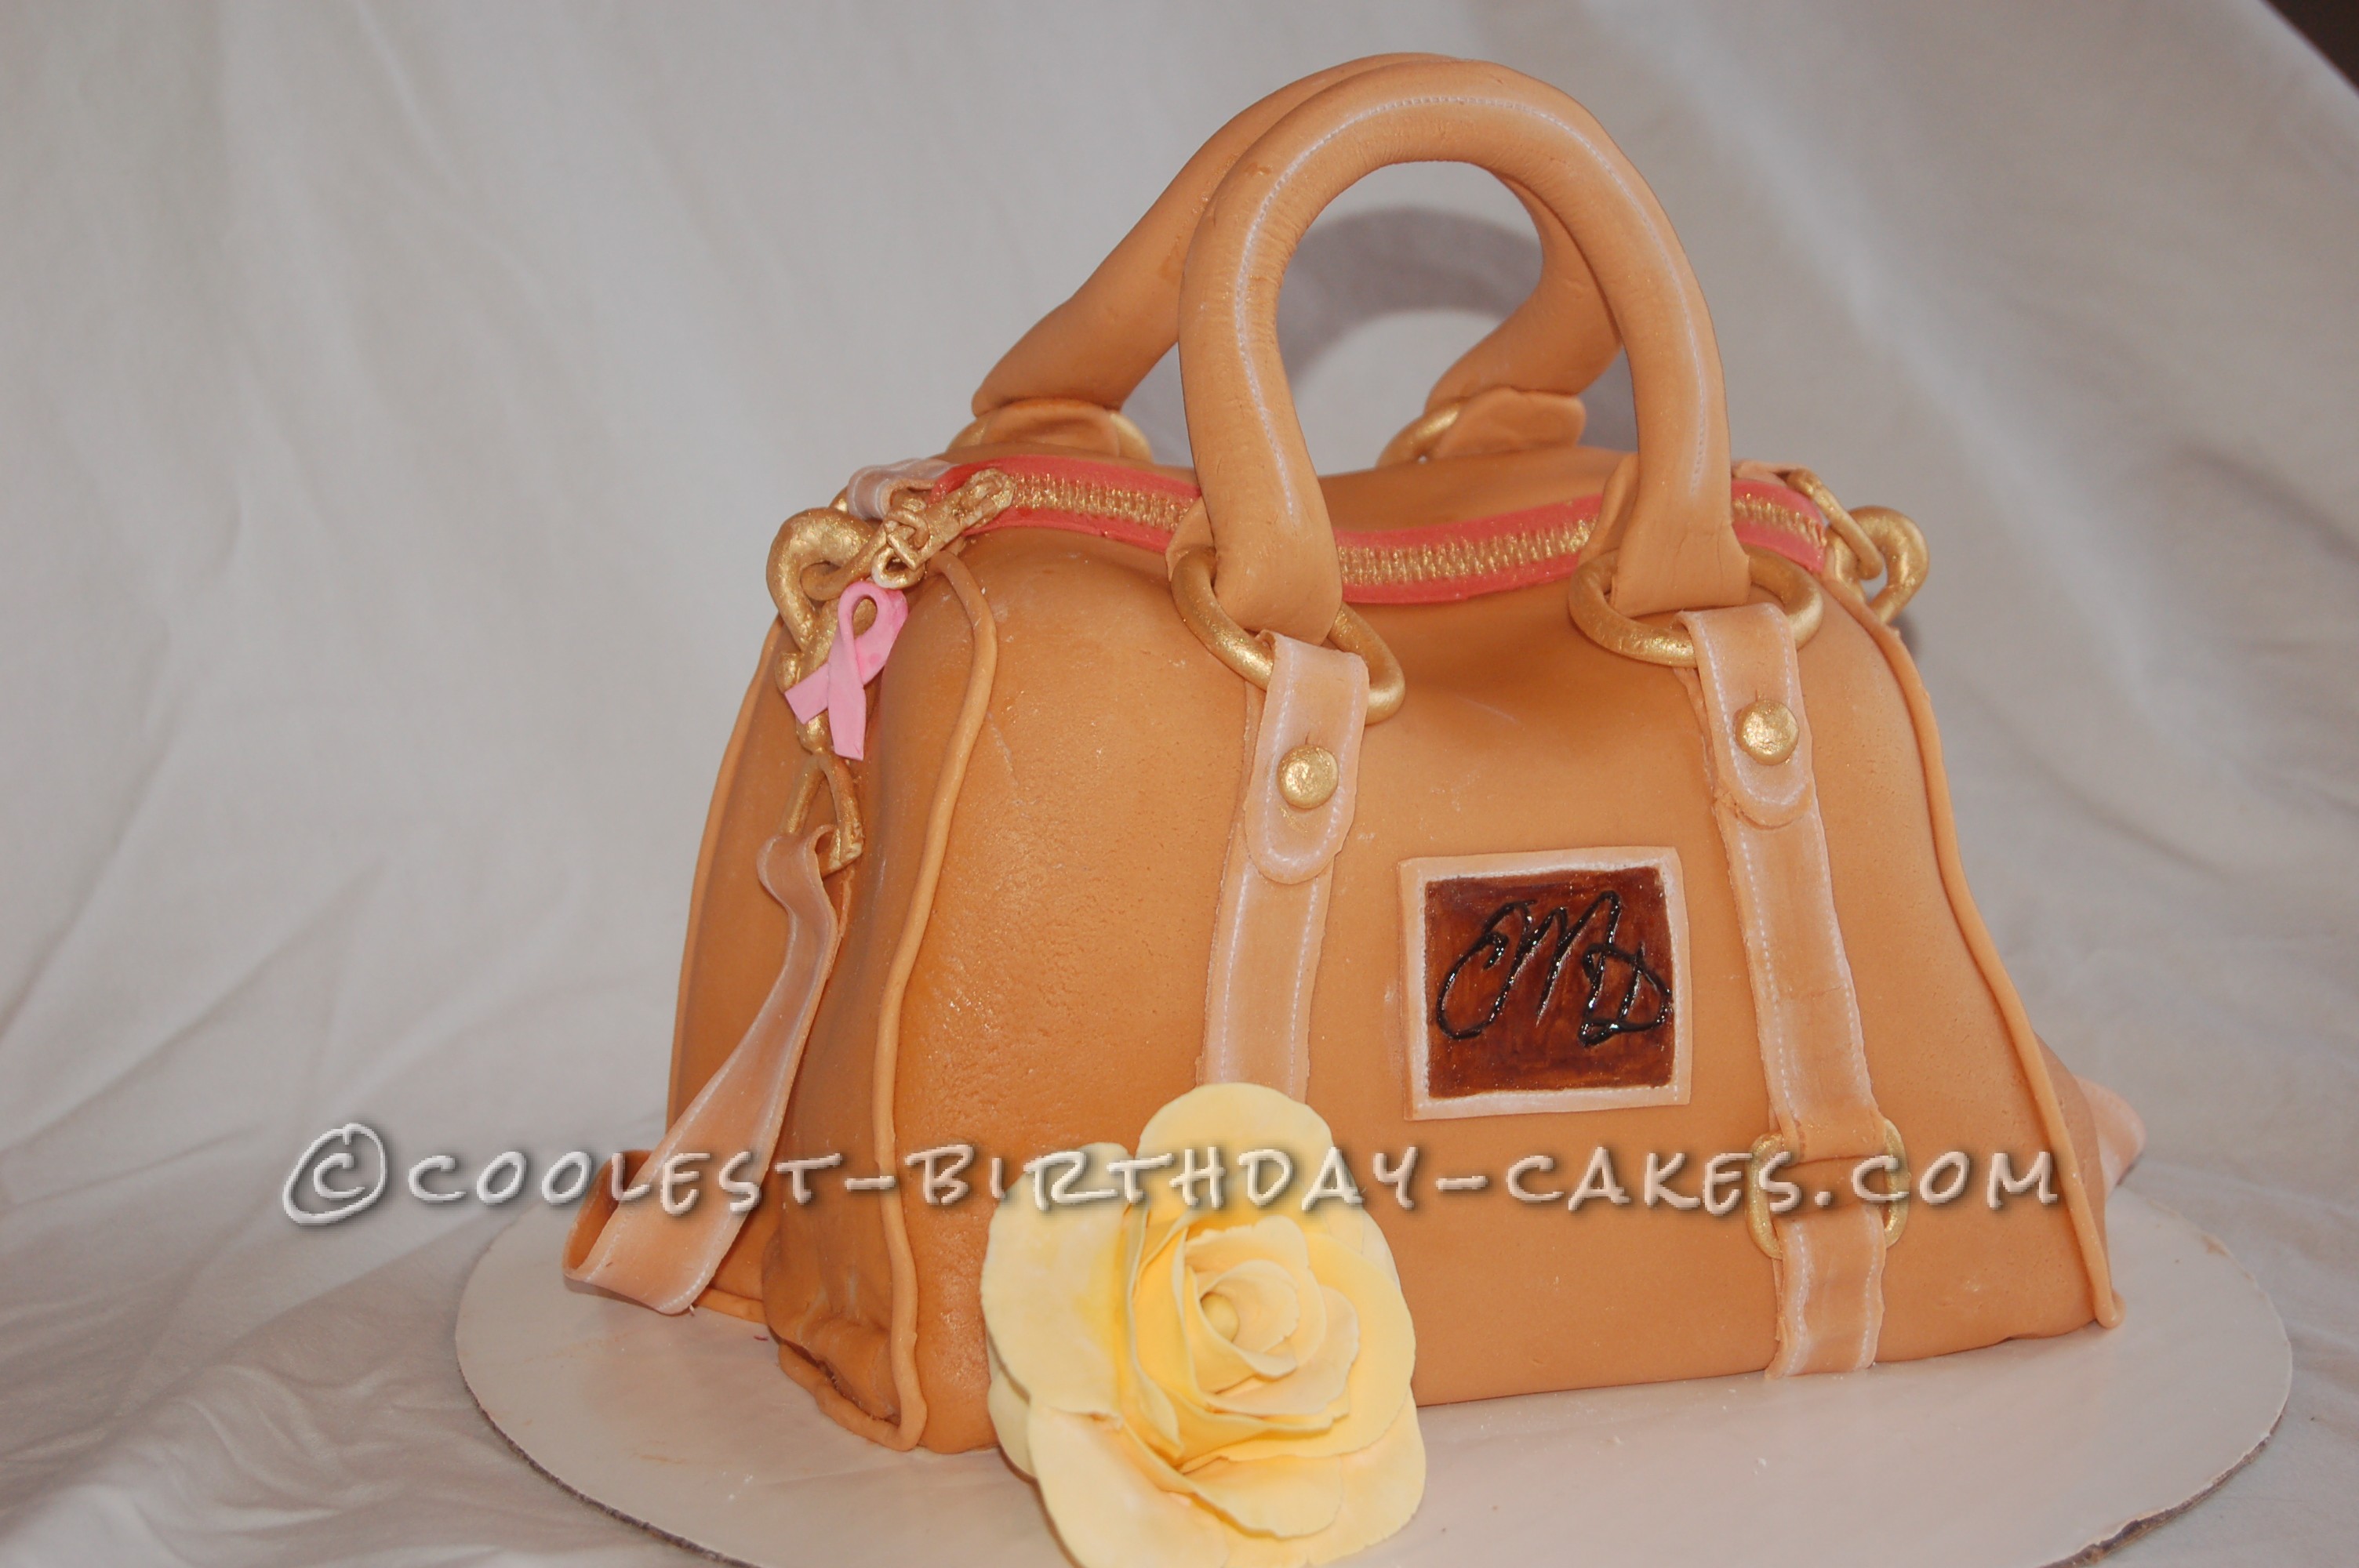 Amazingly Realistic Purse Birthday Cake in Honor of my Beautiful Mother